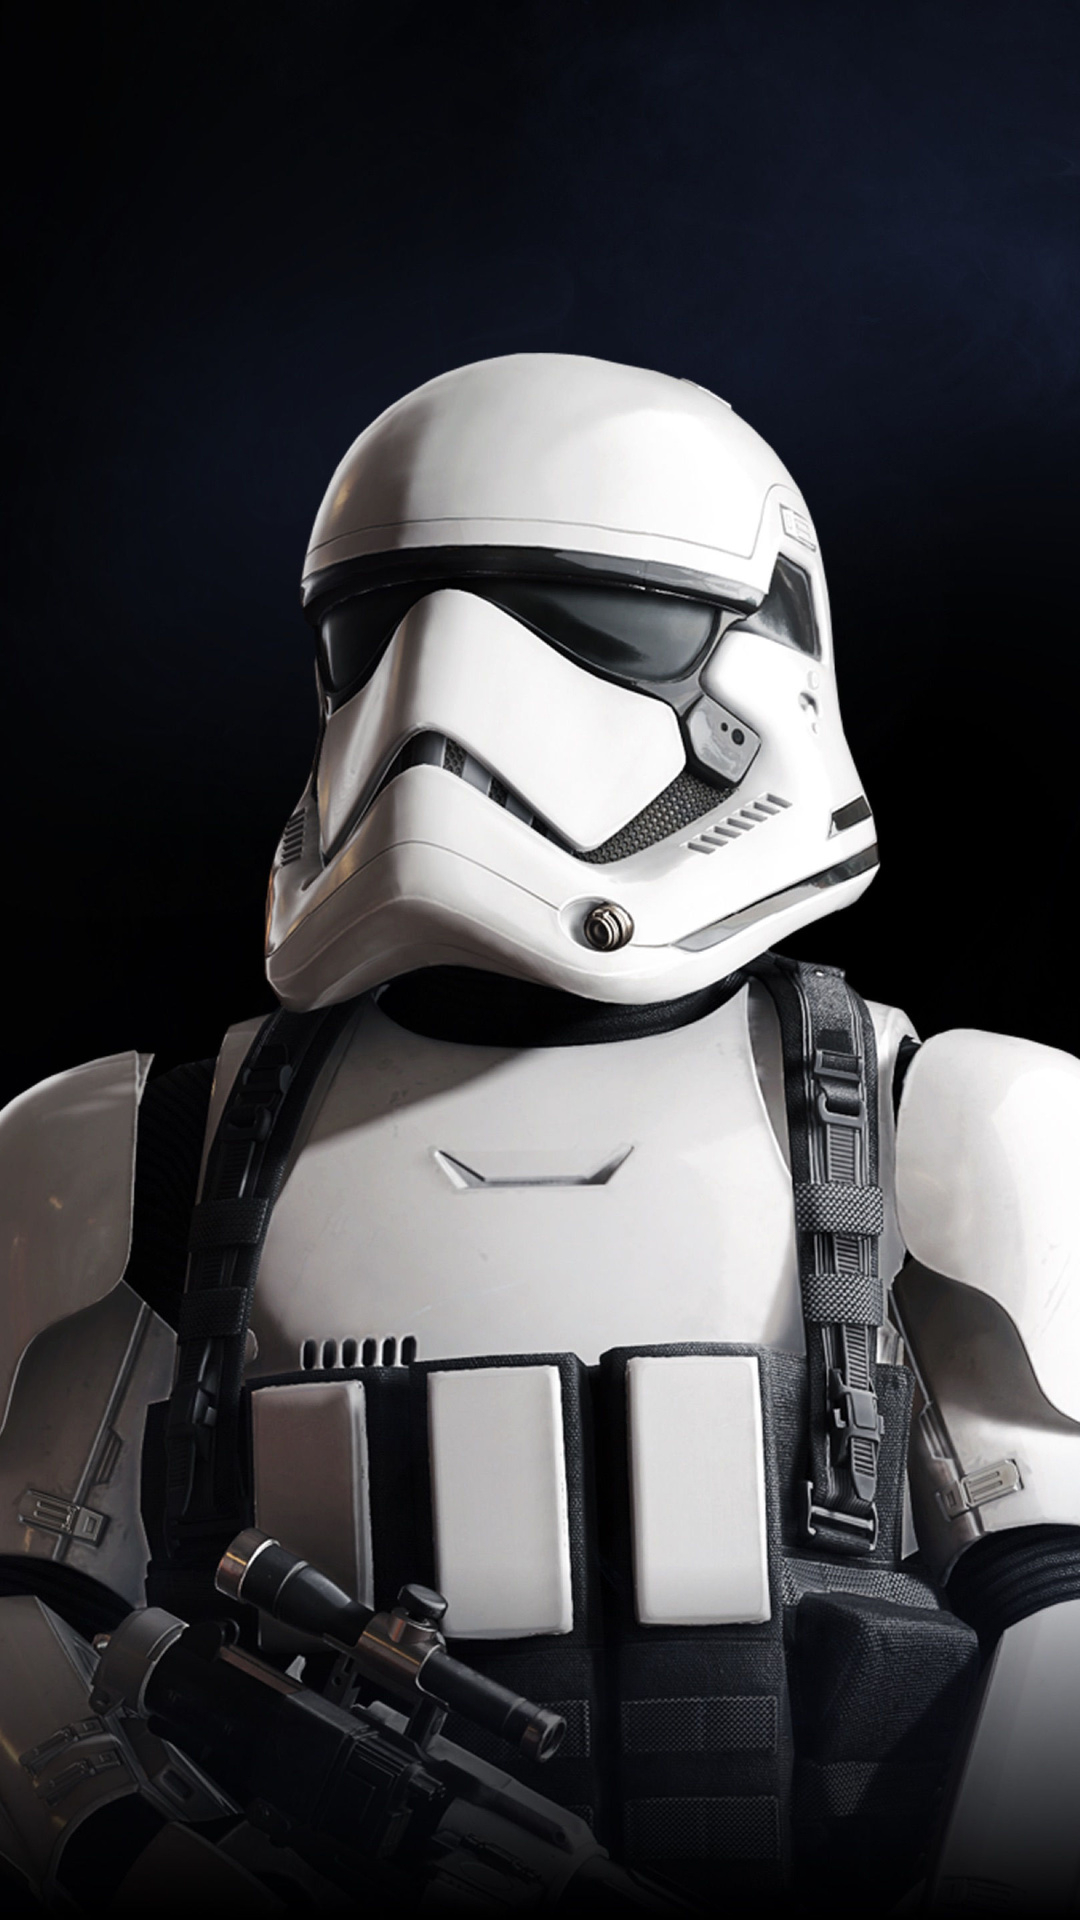 1080x1920 Stormtrooper Star Wars Battlefront 2 5k Iphone 7,6s,6 Plus, Pixel xl ,One Plus 3,3t,5 HD 4k Wallpapers, Images, Backgrounds, Photos and Pictures